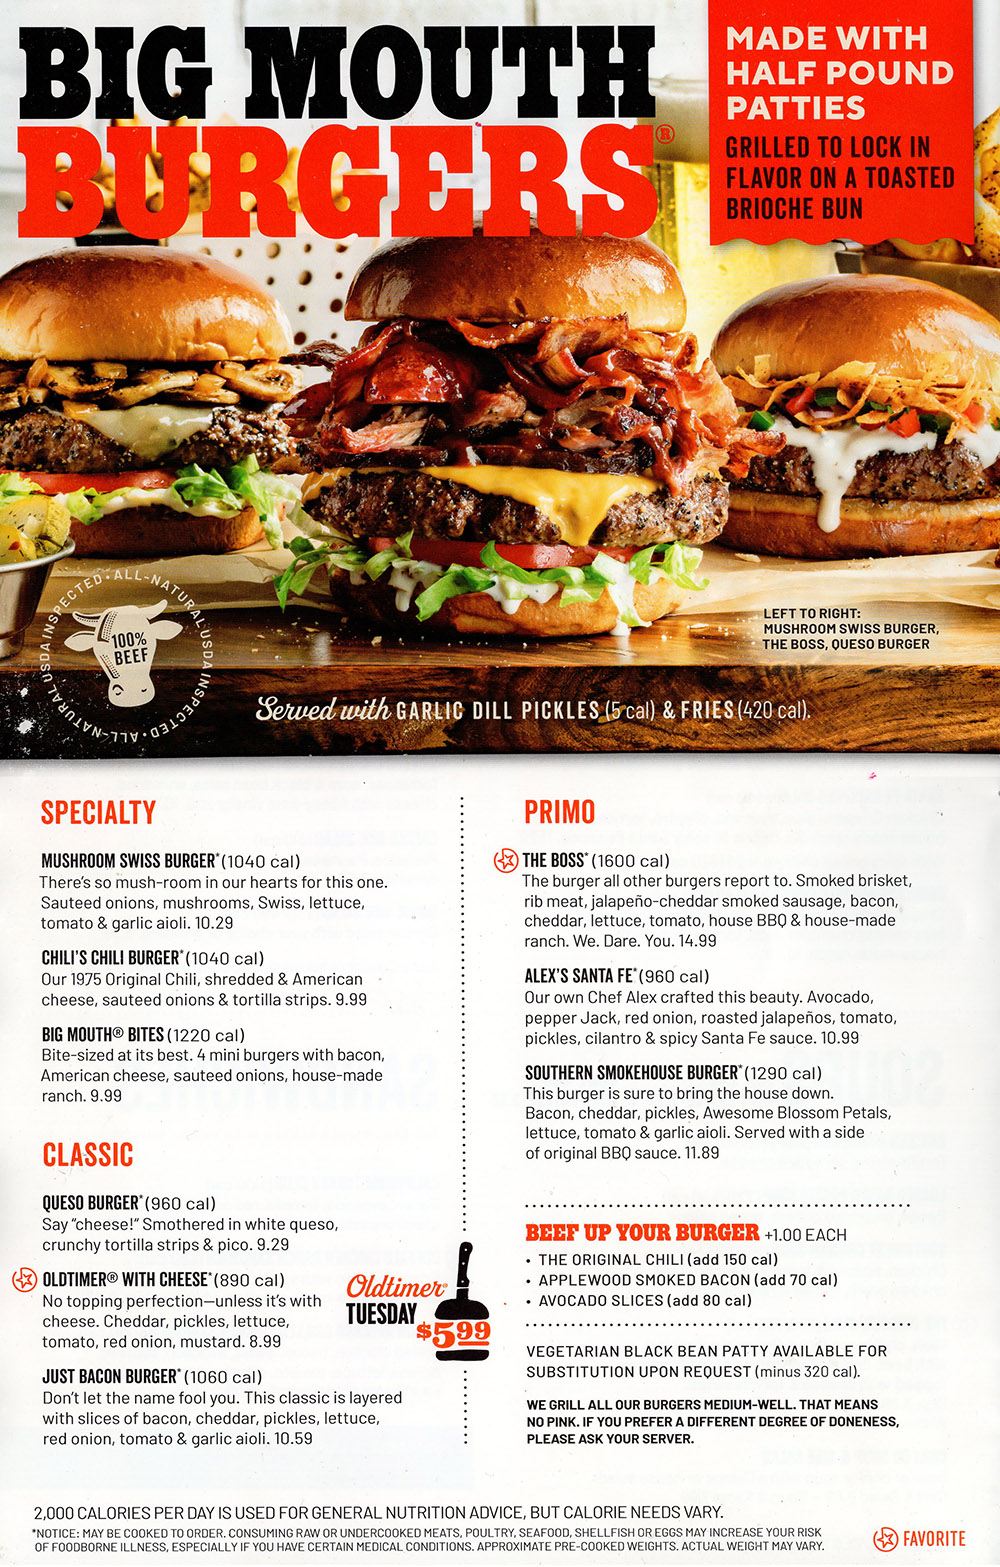 Chili's  Menu - Lincoln Nebraska - Provided by Metro Dining Delivery
BURGERS
SERVED WITH HOMESTYLE FRIES. 
CHOOSE CLASSIC SMASHED BEEF PATTY (390 CAL), 
100% GRASS-FED BEEF PATTY (420 CAL) (ADD 1.00), 
TURKEY PATTY (200 CAL) OR BLACK BEAN PATTY (190 CAL) 

SUNRISE BURGER' (1510 cal) Grass-Fed Beef Patty, cage-free fried egg, Monterey Jack, bacon, lettuce, red onion & tomato with Chili's Signature sauce. 11.99 

ULTIMATE BACON BURGER' (1410 cal) Double bacon, cheddar, pickles, lettuce, red onion, tomato, jalapeno aioli, spicy Buffalo sauce & honey-chipotle sauce. 10.99 

SOUTHERN SMOKEHOUSE BURGER* (1520 cal) Bacon, cheddar, pickles, spiced panko onion rings, lettuce, tomato & Chili's Signature sauce. Served with a side of Chili's classic BBQ sauce. 10.99
 
GUACAMOLE BURGER' (1240 cal) Guacamole, provolone, jalapenos, red & green bell peppers, caramelized onions & cumin-lime sour cream. 9.79 

OLDTIMEIVWITH CHEESE' (1140 cal) Pickles, lettuce, tomato, red onion & mustard. 8.79 

CLASSIC BACON BURGER' (1270 cal) Cheddar, bacon, pickles, lettuce, tomato, red onion & Chili's Signature sauce. 9.99 

BIG MOUTH° BITES (1640 cal) 4 mini burgers with bacon, American cheese, onions & house-made ranch. 9.79 

SANDWICHES 
SERVED WITH HOMESTYLE FRIES. 

CALIFORNIA TURKEY CLUB TOASTED SANDWICH (1480 cal) Thinly sliced turkey, applewood smoked bacon, sliced avocado, tomato & red onion with provolone, lettuce & mayo on wheat Texas toast. 9.29 

BACON AVOCADO CHICKEN SANDWICH (1590 cal) Grilled chicken breast topped with applewood smoked bacon, provolone, sliced avocado, sauteed onions, lettuce mix, tomato & cilantro pesto mayo on a toasted buttery roll. 10.29 

GRILLED CHICKEN SANDWICH (1090 cal) Chicken breast with applewood smoked bacon, sliced tomato, lettuce, provolone & honey-mustard. 9.29 

BUFFALO CHICKEN RANCH SANDWICH (1250 cal) Crispy chicken with spicy Buffalo sauce, sliced tomato, lettuce & house-made ranch. 8.99 

CLASSIC TURKEY TOASTED SANDWICH (1290 cal) Thinly sliced turkey with lettuce, sliced tomato, provolone & mayo on wheat Texas toast. 7.99 

LIGHTER CHOICES 
ALL THE FLAVOR FOR 610 CALORIES OR LESS. 

6 OZ. CLASSIC SIRLOIN* WITH GRILLED AVOCADO (420 cal) 100% USDA Choice sirloin with Chili's seasoning & drizzled with spicy citrus-chile sauce, topped with grilled avocado slices, garlic roasted tomatoes & chopped cilantro. Served with fresco salad. 12.99 

MARGARITA GRILLED CHICKEN (610 cal) Margarita grilled chicken breast topped with house-made pico de gallo & tortilla strips. Served with citrus-chile rice & black beans. 11.49 

ANCHO SALMON (590 cal) Seared chile-rubbed Atlantic salmon drizzled with spicy citrus-chile sauce & topped with chopped cilantro & queso fresco. Served with citrus-chile rice & steamed broccoli. 14.99 

GRILLED CHICKEN SALAD (440 cal) Grilled chicken breast with fresh diced tomatoes, house-made corn & black bean salsa, 3-cheese blend & honey-lime vinaigrette. 9.49 

2,000 calories per day is used for general nutrition advice, but calorie needs vary. 

NOTICE: IF YOU HAVE A FOOD OR NUT ALLERGY, PLEASE SPEAK TO THE MANAGER OR YOUR SERVER. BECAUSE ROUTINE FOOD PREPARATION TECHNIQUES, SUCH AS COMMON OIL FRYING, MAY ALLOW CONTACT AMONG VARIOUS FOOD ITEMS, WE CANNOT GUARANTEE ANY FOOD ITEMS TO BE COMPLETELY ALLERGEN-FREE. 